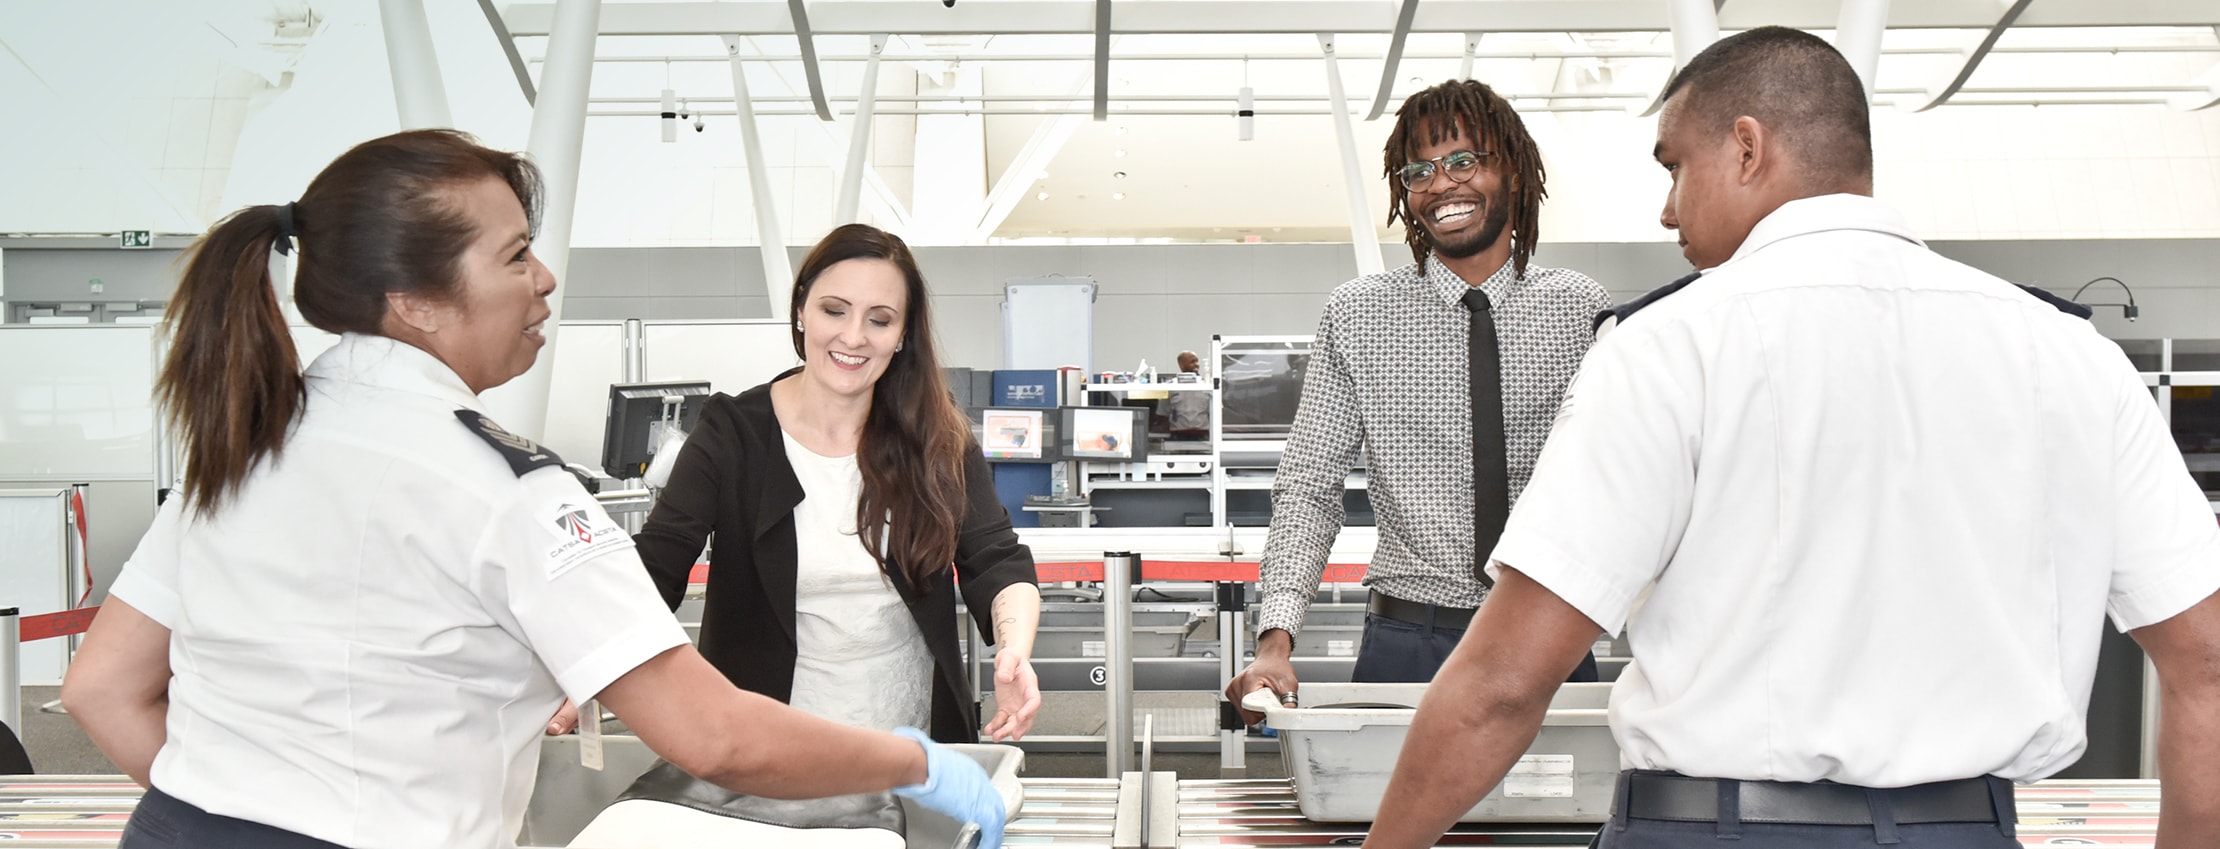 Employees and travellers smile while interacting in a Toronto Pearson security area